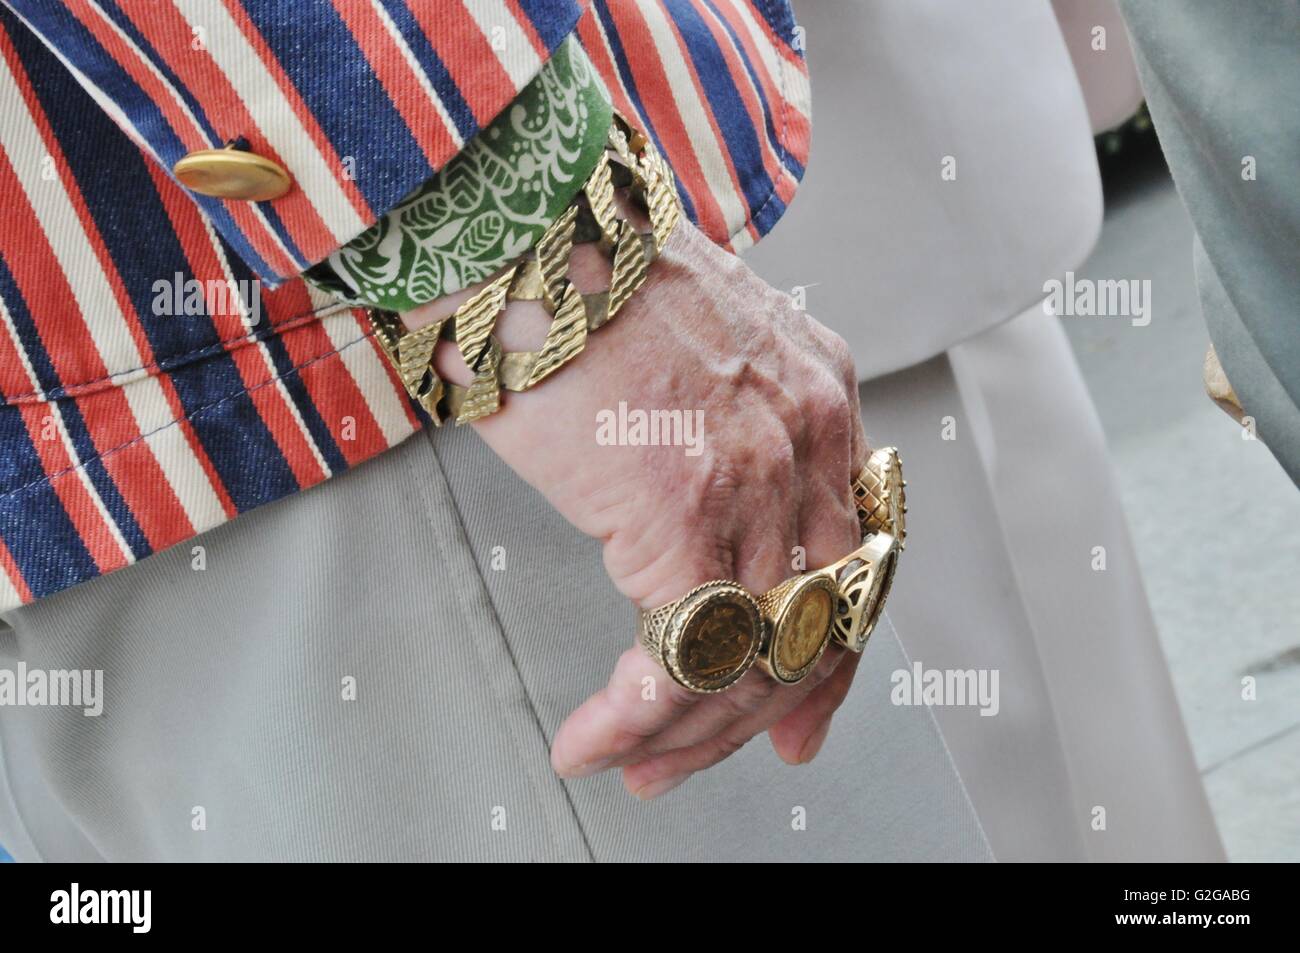 An eccentric man shows off his gold rings, at the St George's day festival in London's Trafalgar square. Stock Photo